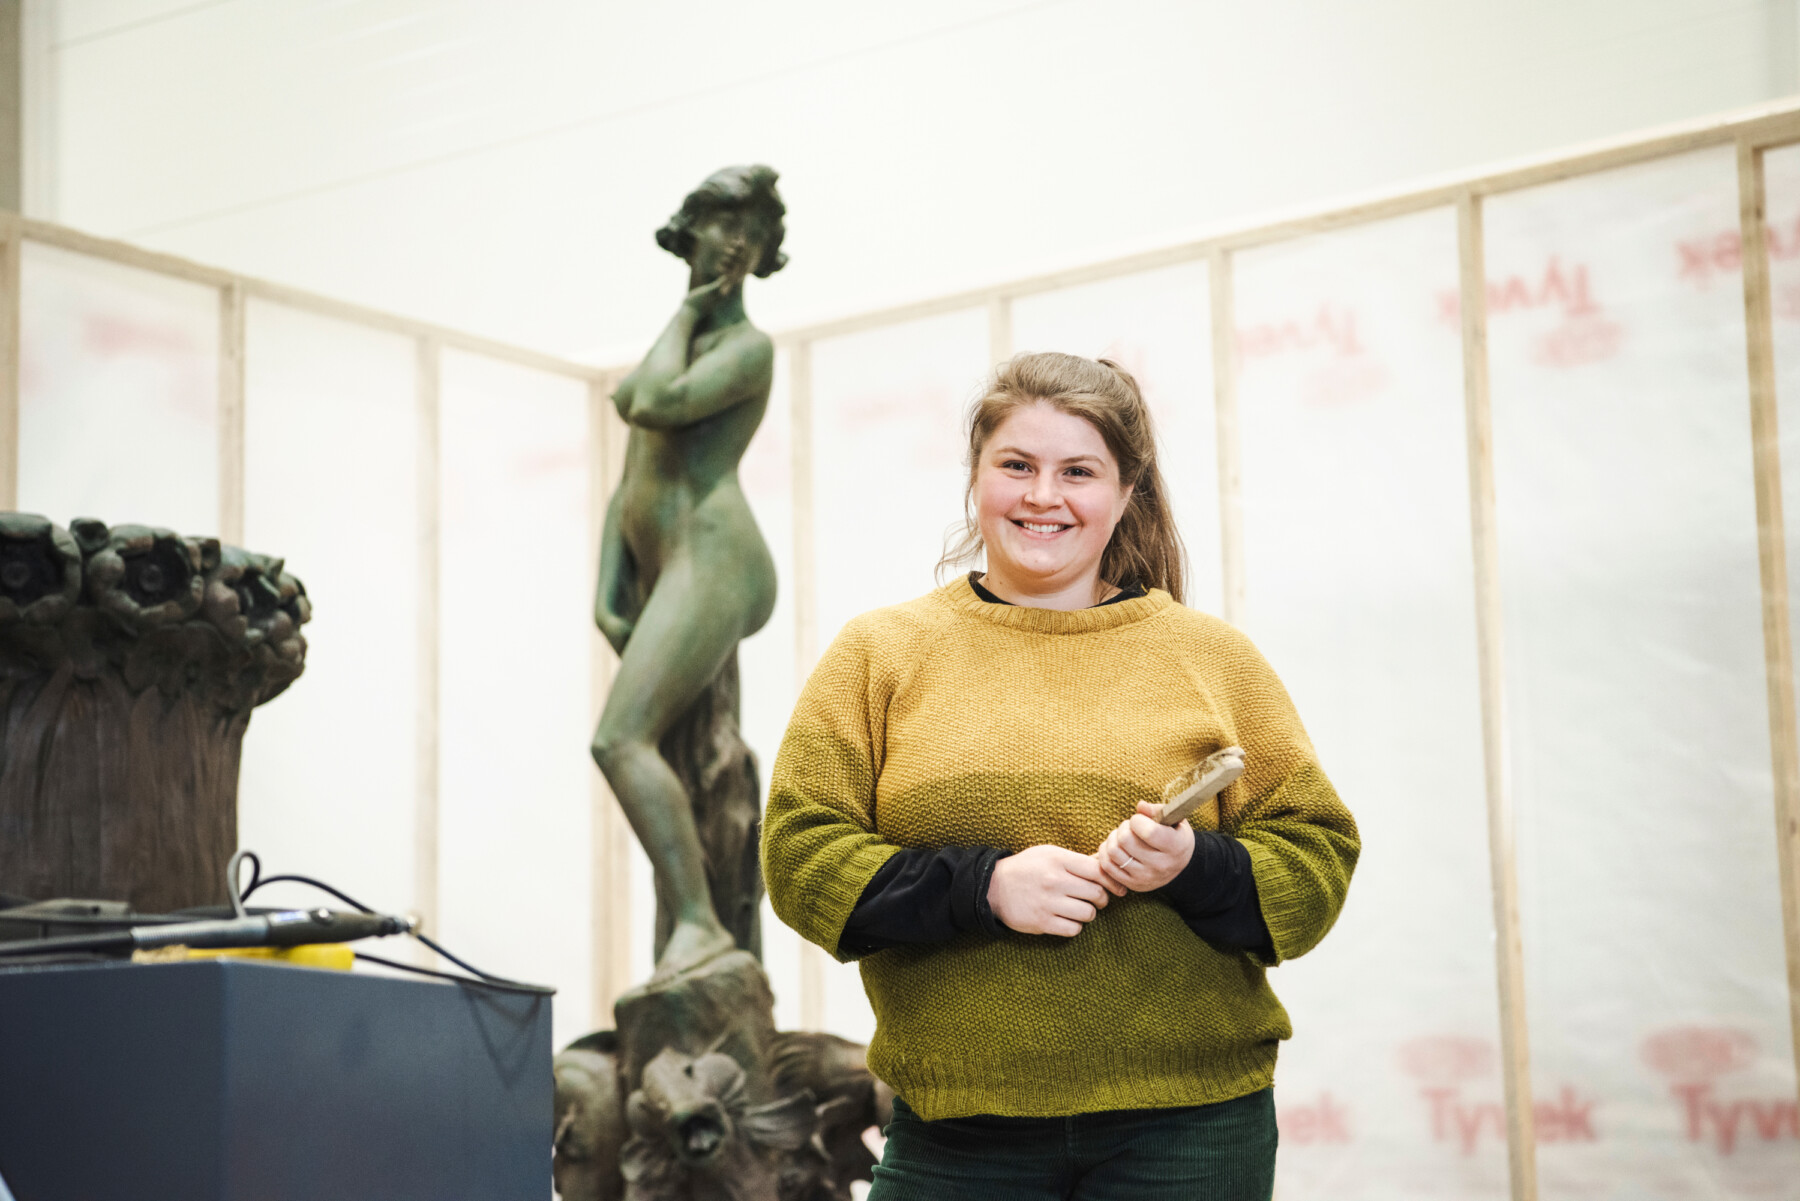 A woman with a brush in her hands stands in a workshop in front of a metal statue of a female figure.